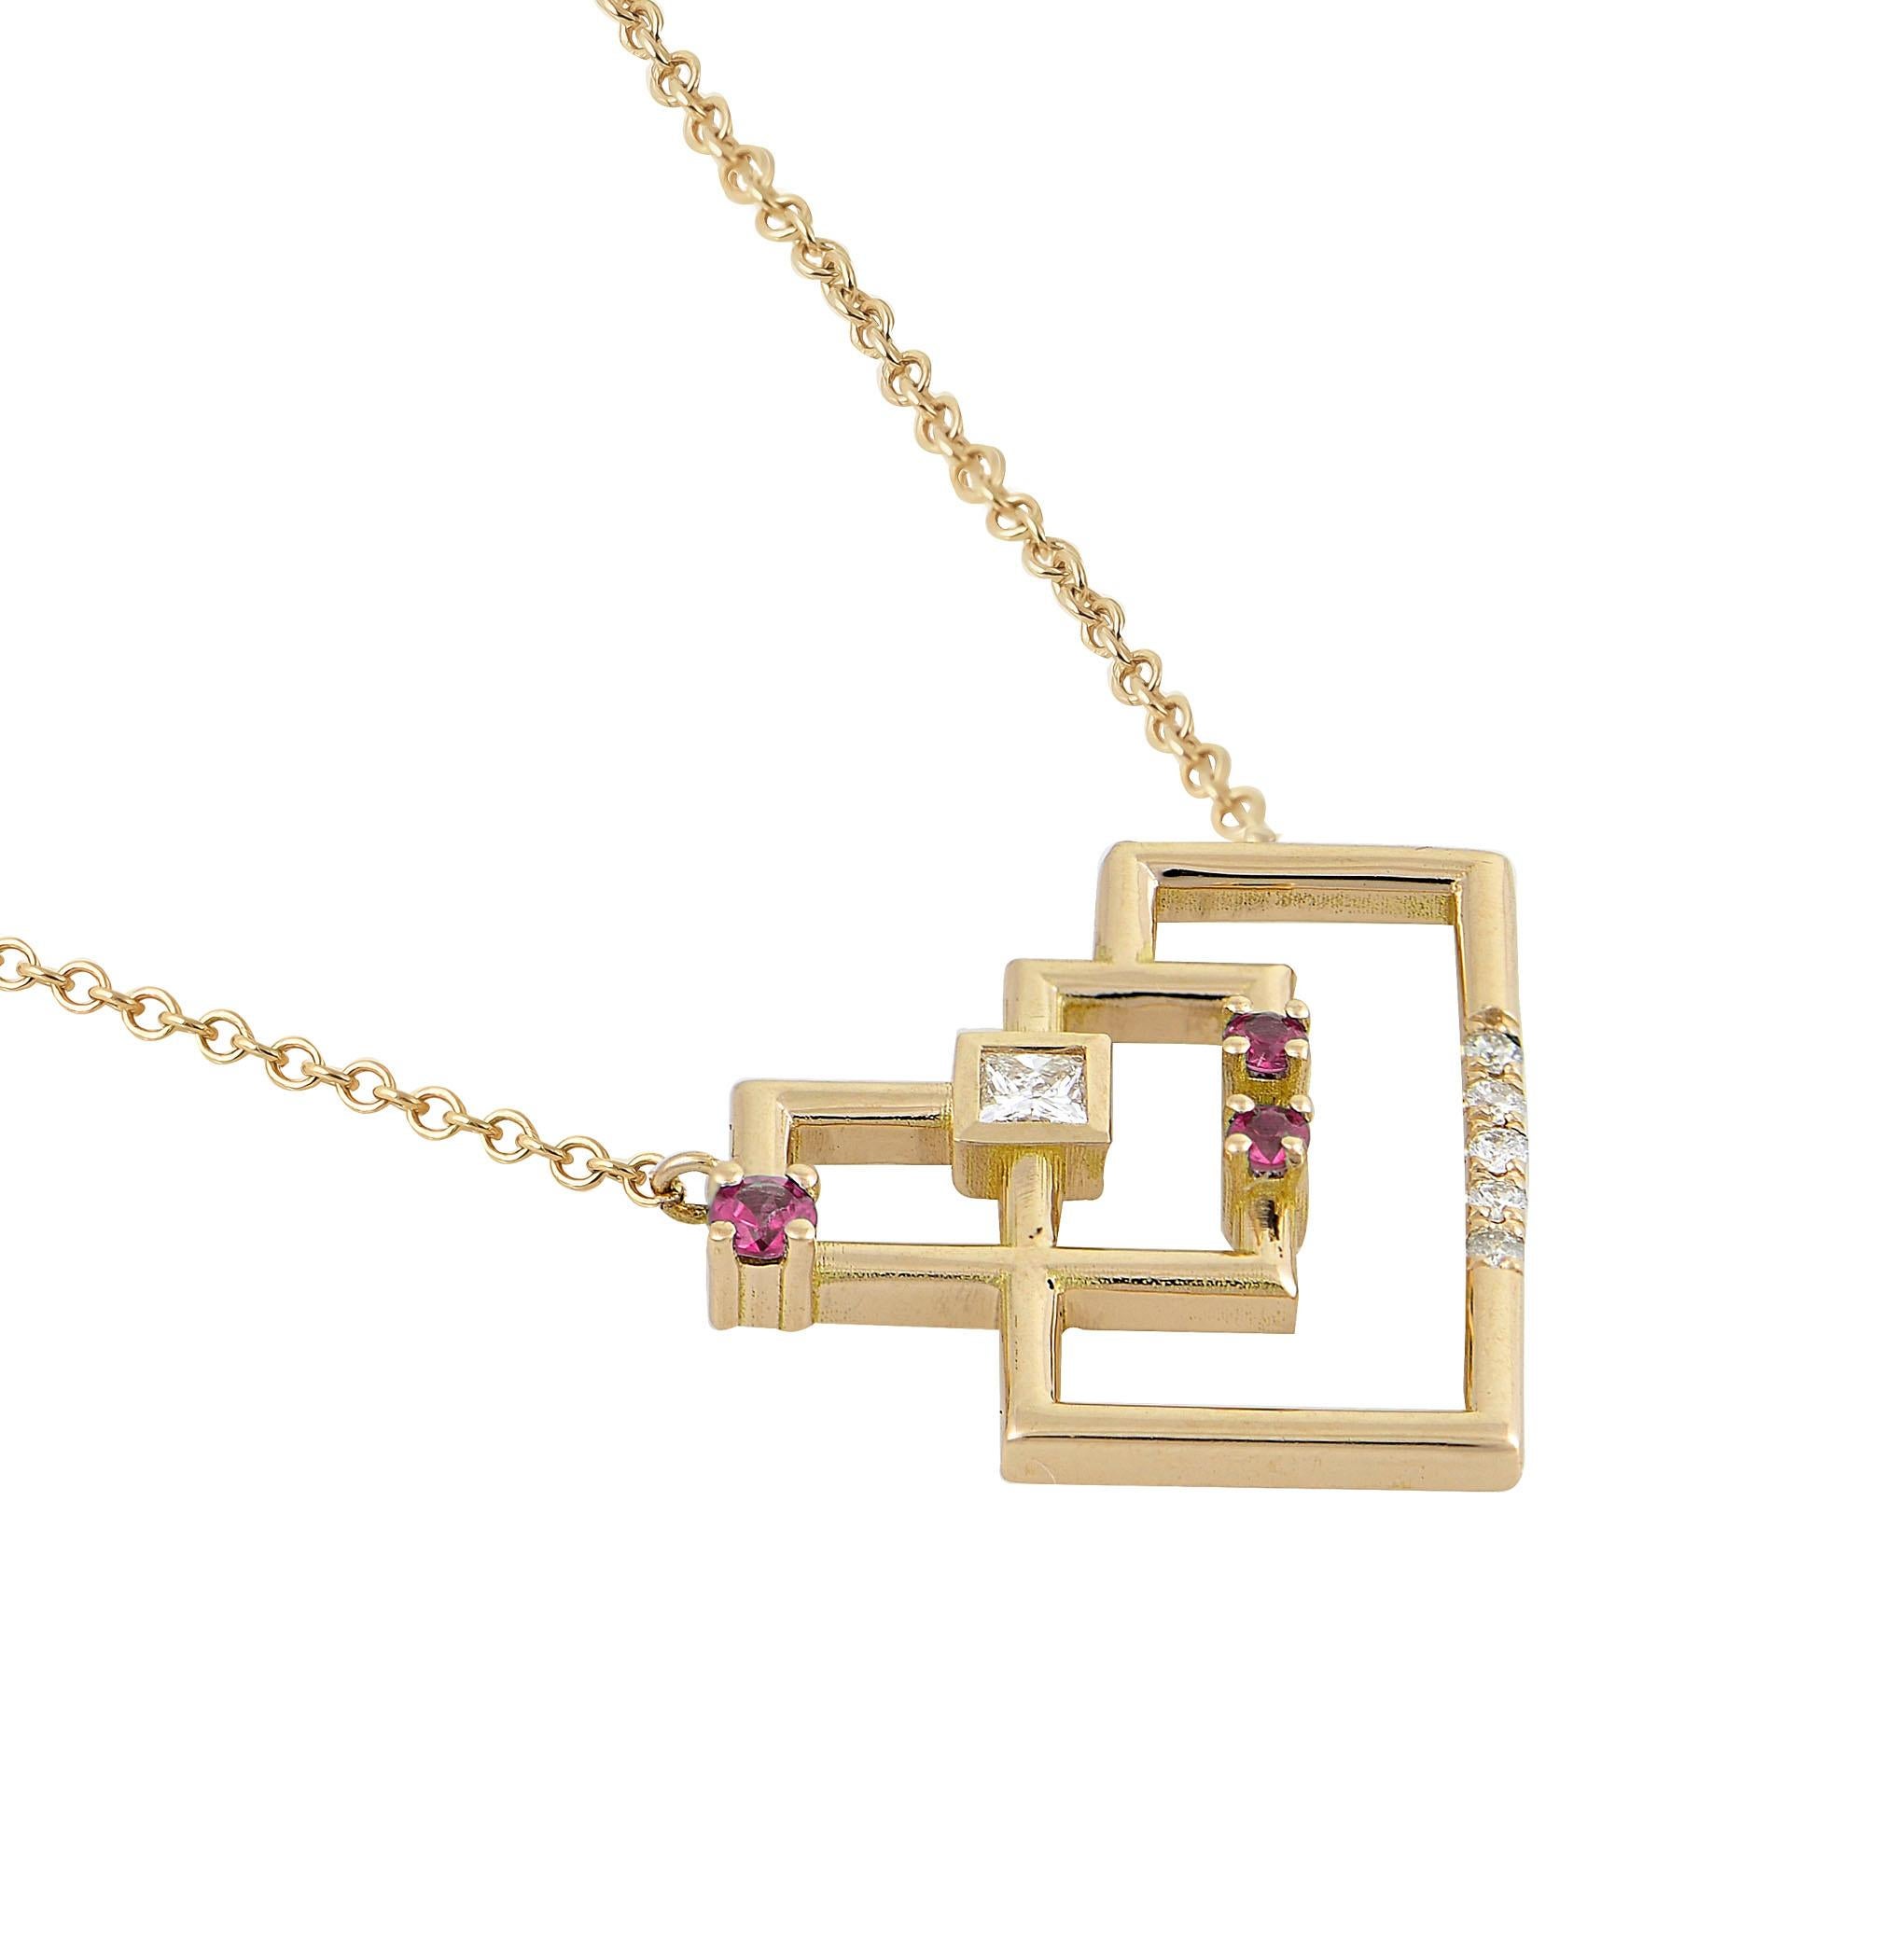 Designer: Alexia Gryllaki

Dimensions: motif 17x19mm, chain 450mm
Weight: approximately 3.5g 
Barcode: ING027PR

The Interlocking Geometry pendant in 18 karat yellow gold with rubies approx. 0.10cts, a princess-cut diamonds and round brilliant-cut